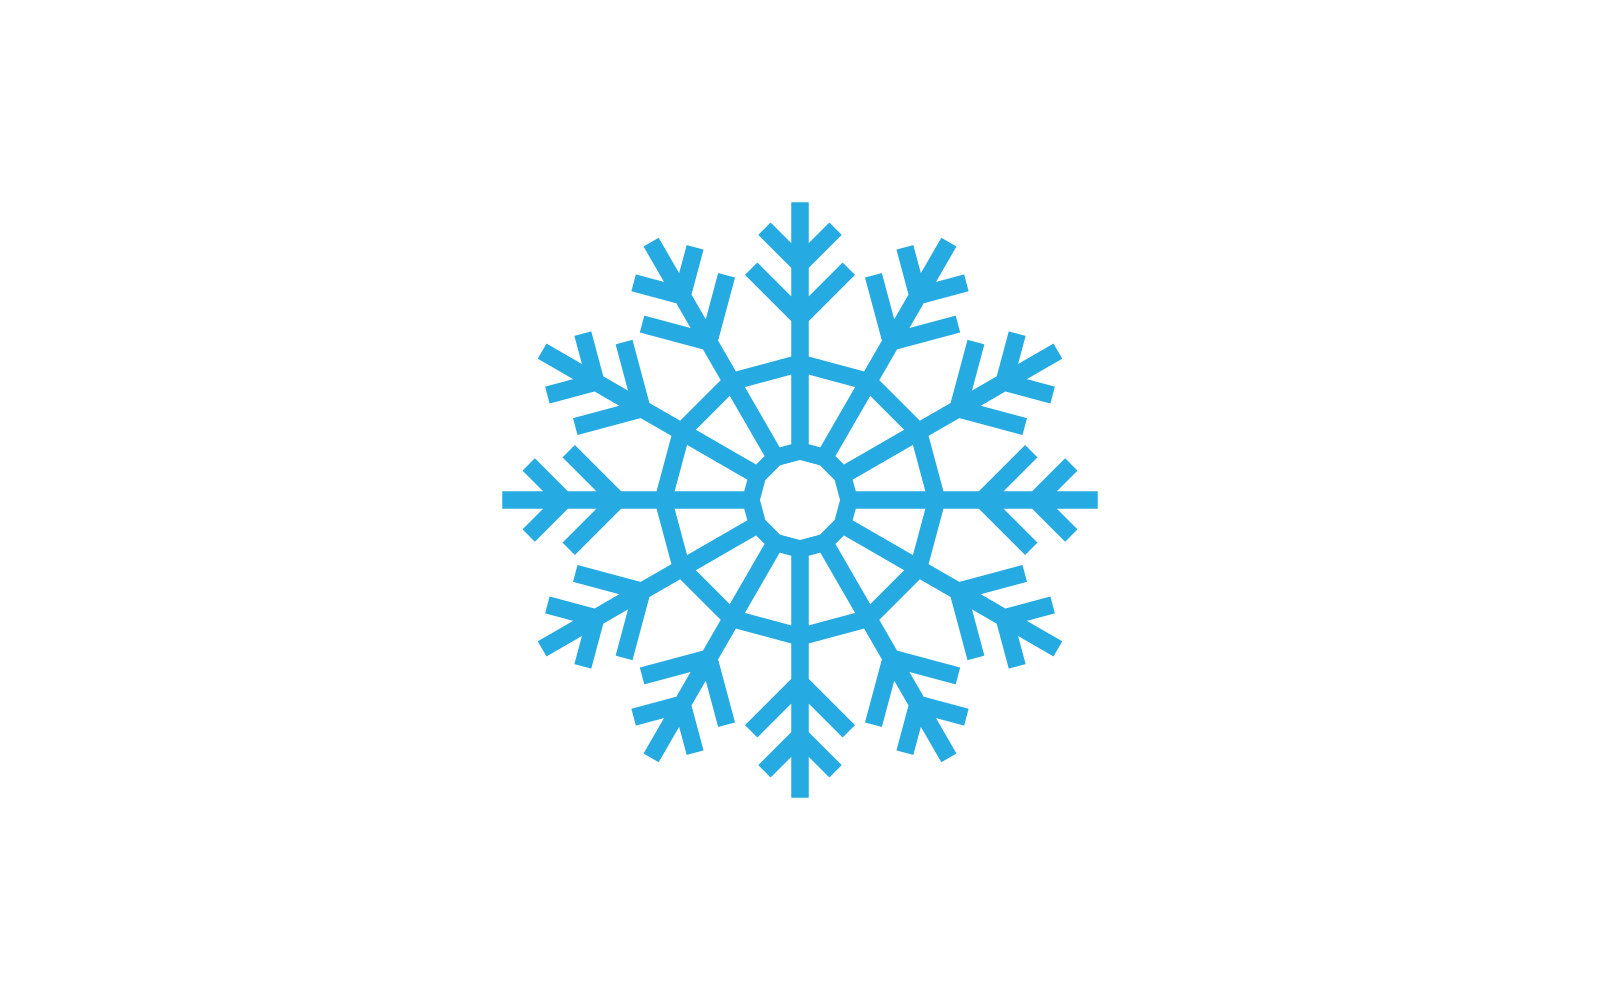 Snowflakes icon and symbol ilustration vector flat design